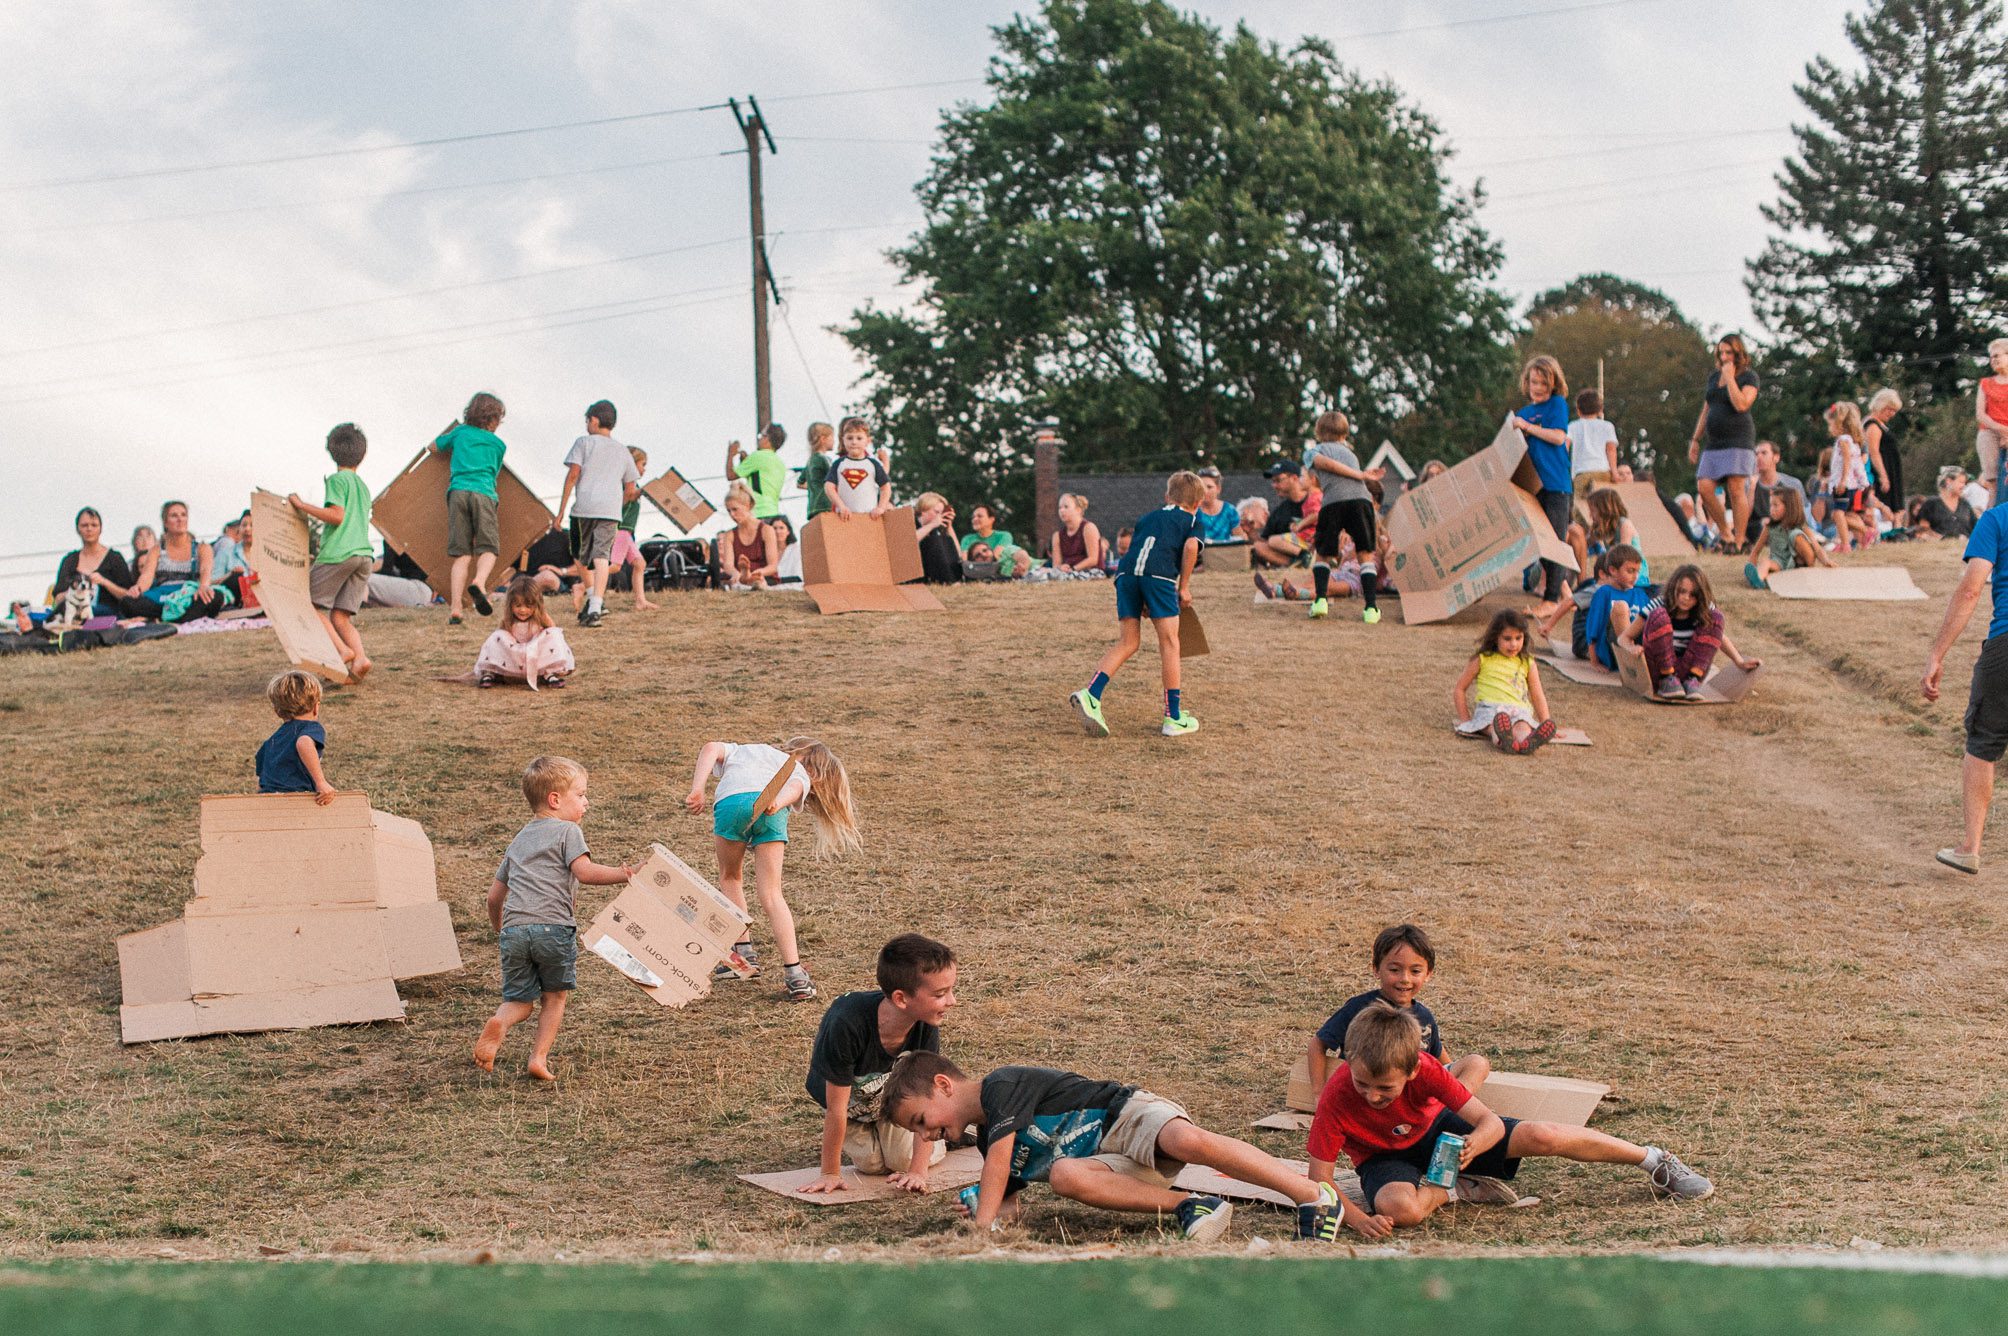 Local kids sliding down a grassy hill on pieces of cardboard while their parents wait for the Swifts to descend into Chapman Elementary School's Chimney. Photography by Briana Morrison